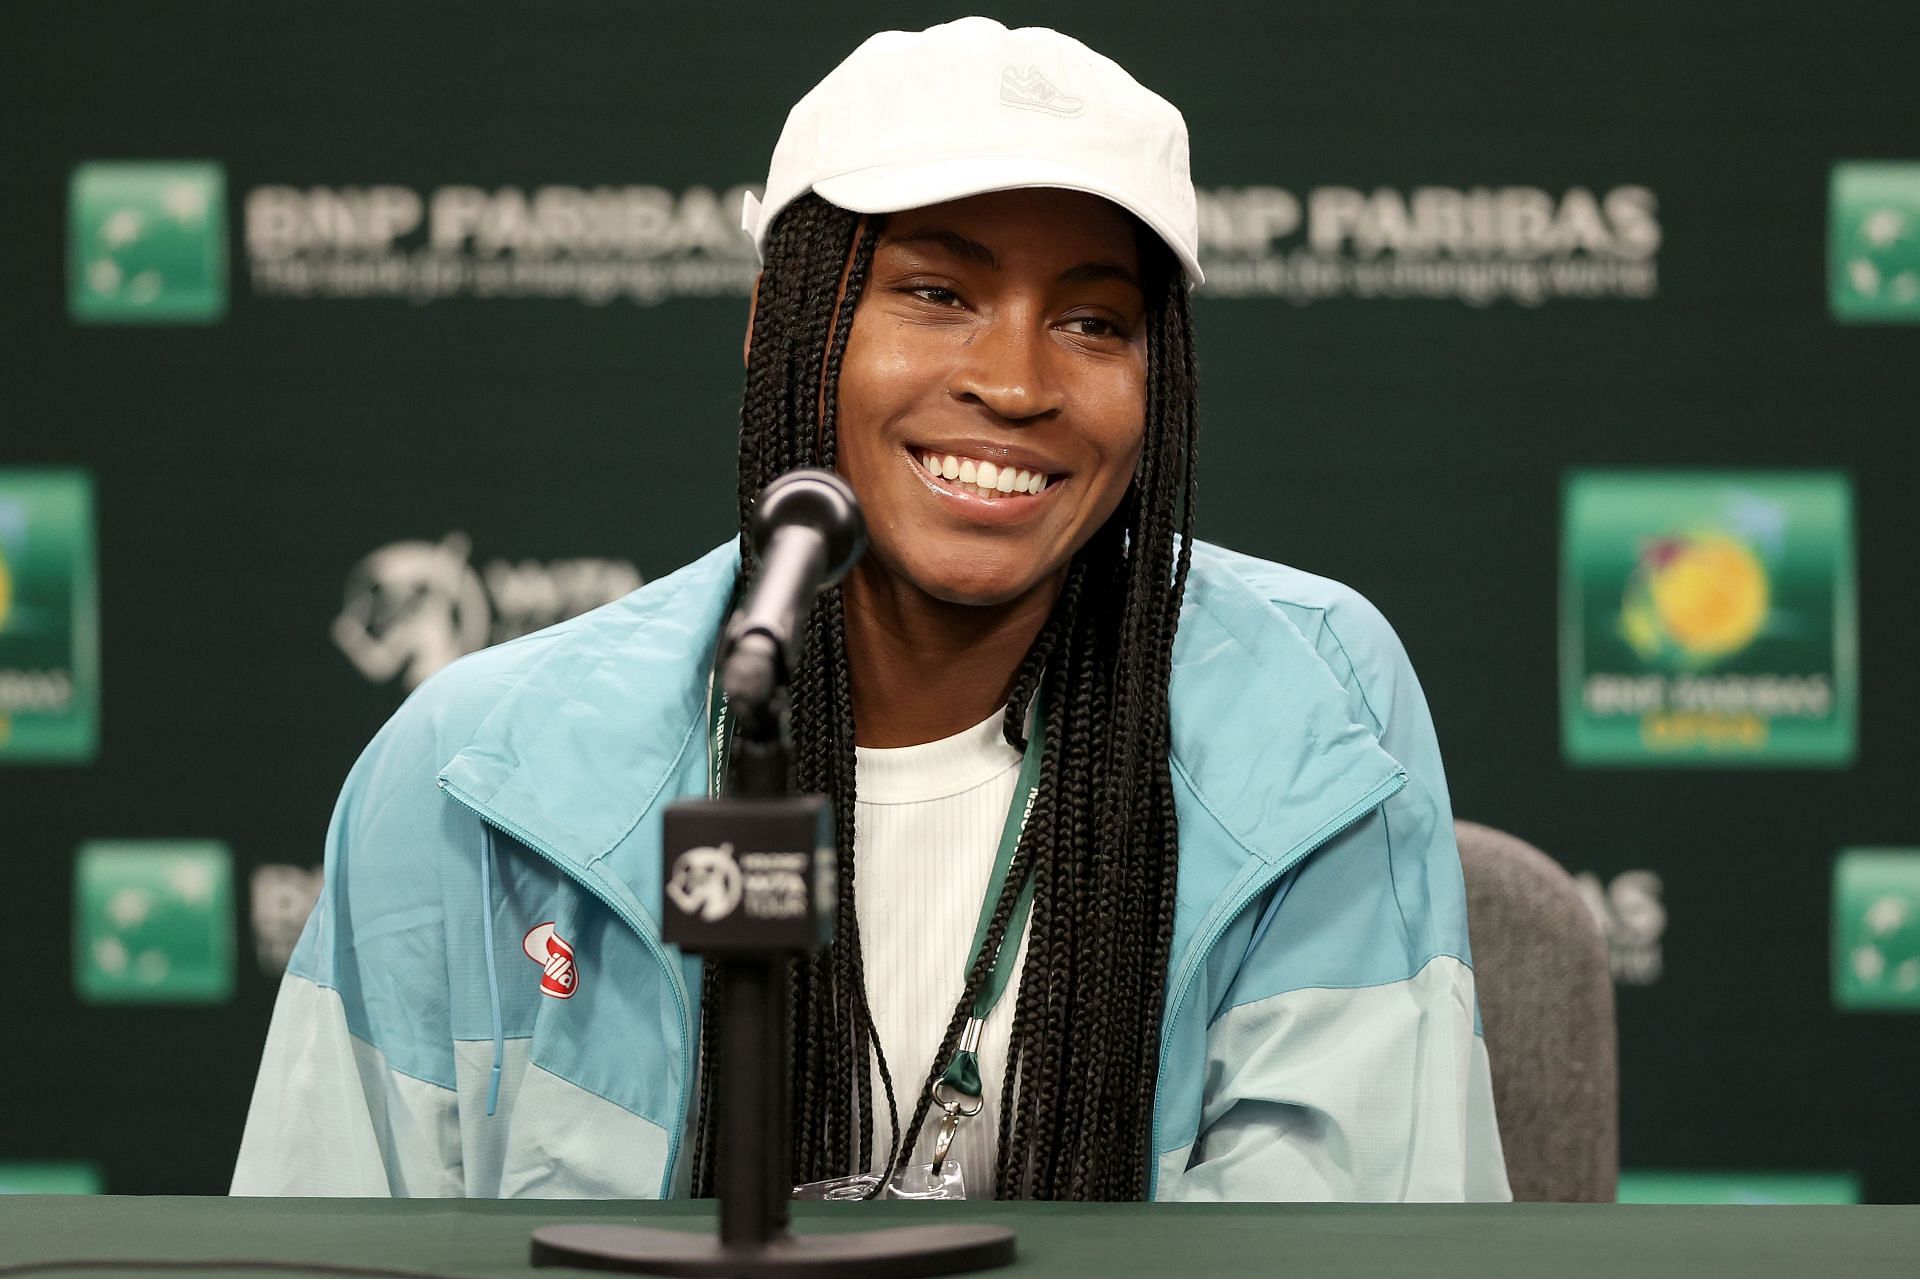 Coco Gauff at the 2023 BNP Paribas Open press conference